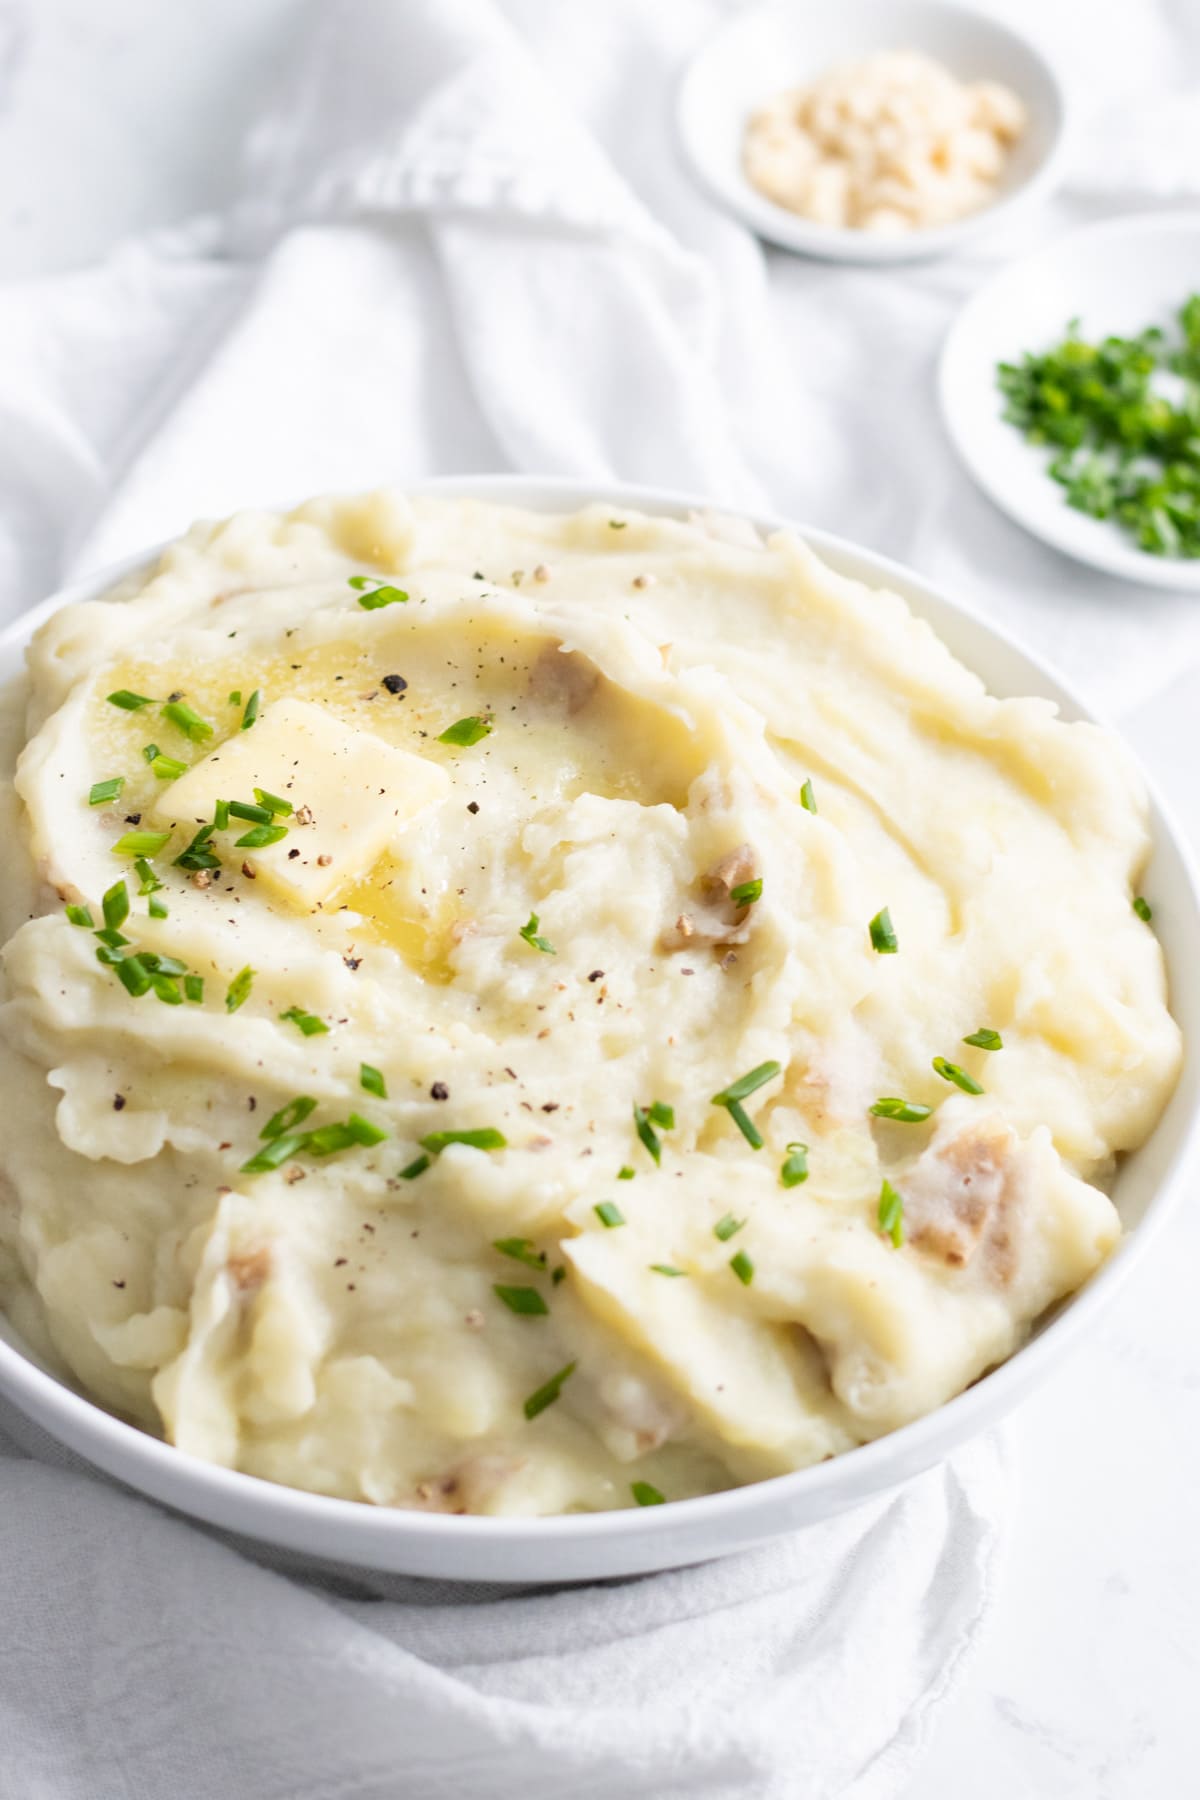 A bowl of mashed potatoes sits on a white linen napkin. The focus is on a melting dab of butter swirled into the potatoes. There are small bowls of chives and horseradish in the background.